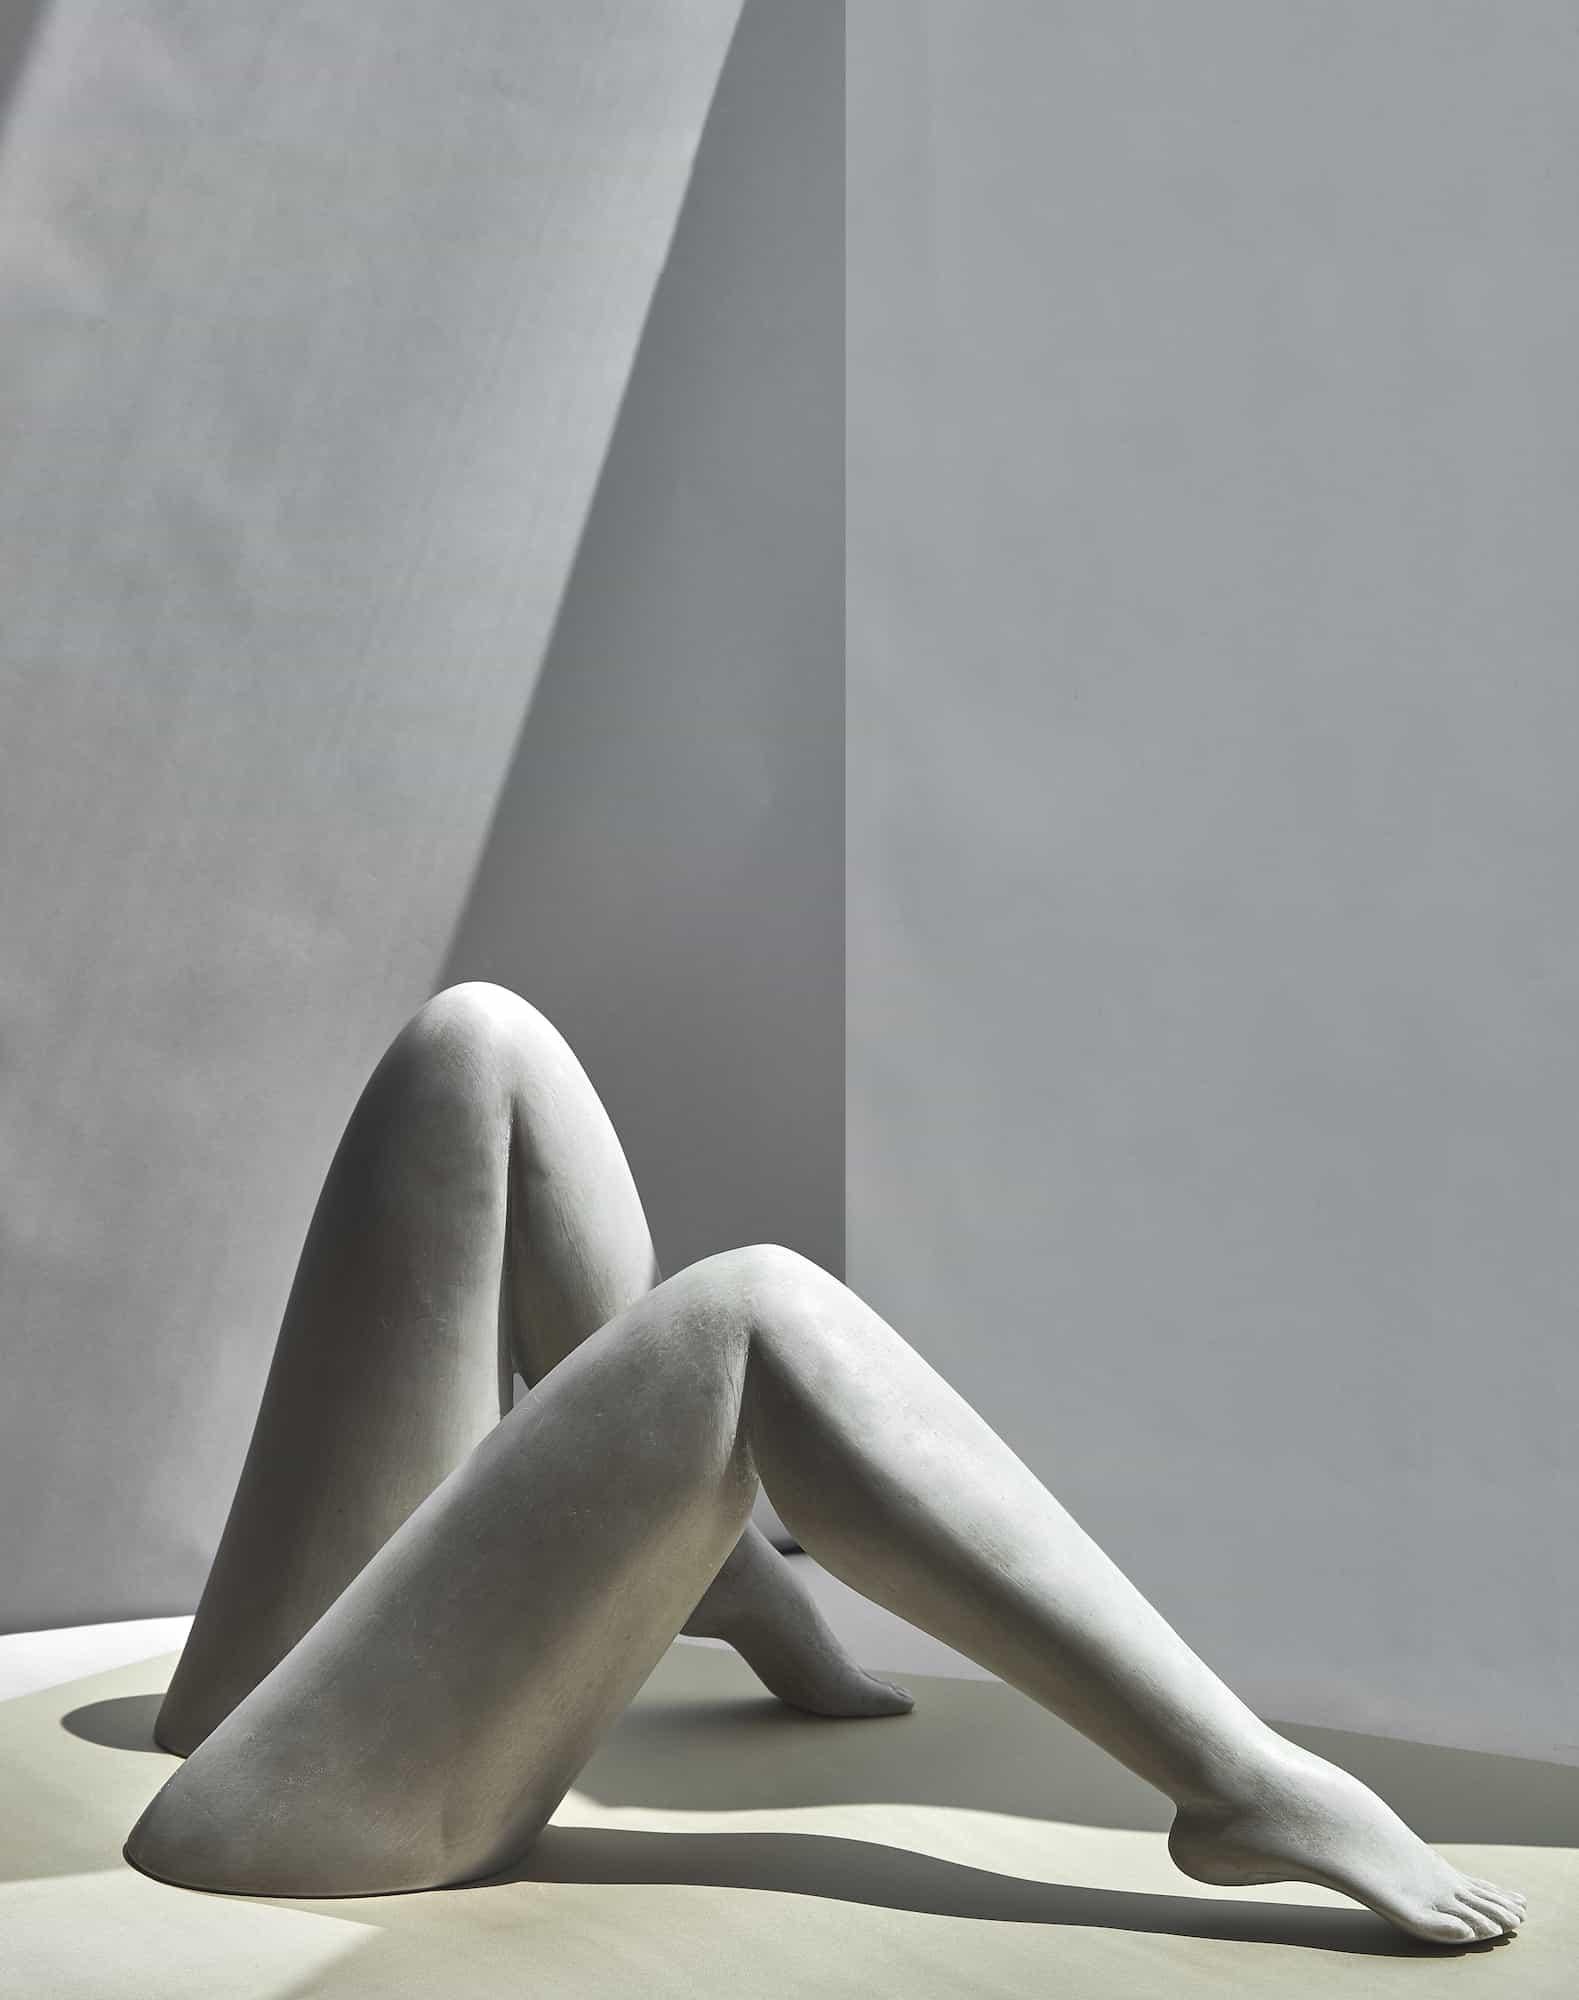 Le Gambe Sculpture by Marcela Cure
Dimensions: Leg 1 W 47 x D 12 x H 22 cm / Leg 2 W 29 x D 12 x H 29 cm
Materials: Resin and Stone Composite

Our Le Gambe sculpture is composed of two individual legs which can be set in different ways creating